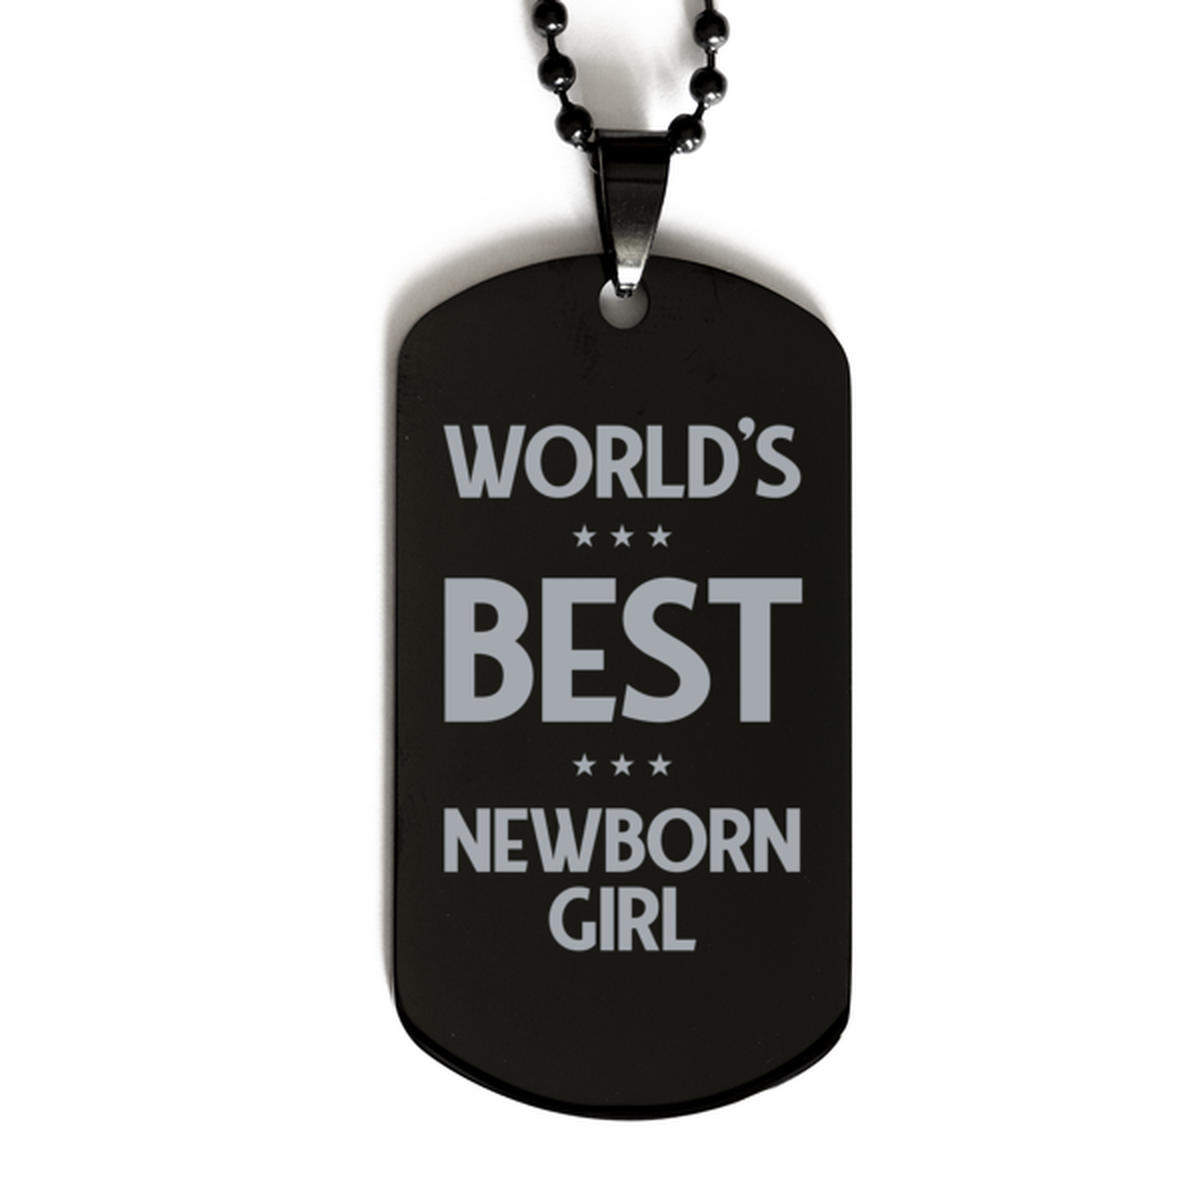 Worlds Best Newborn girl Gifts, Funny Black Engraved Dog Tag For Newborn girl, Birthday Presents For Women